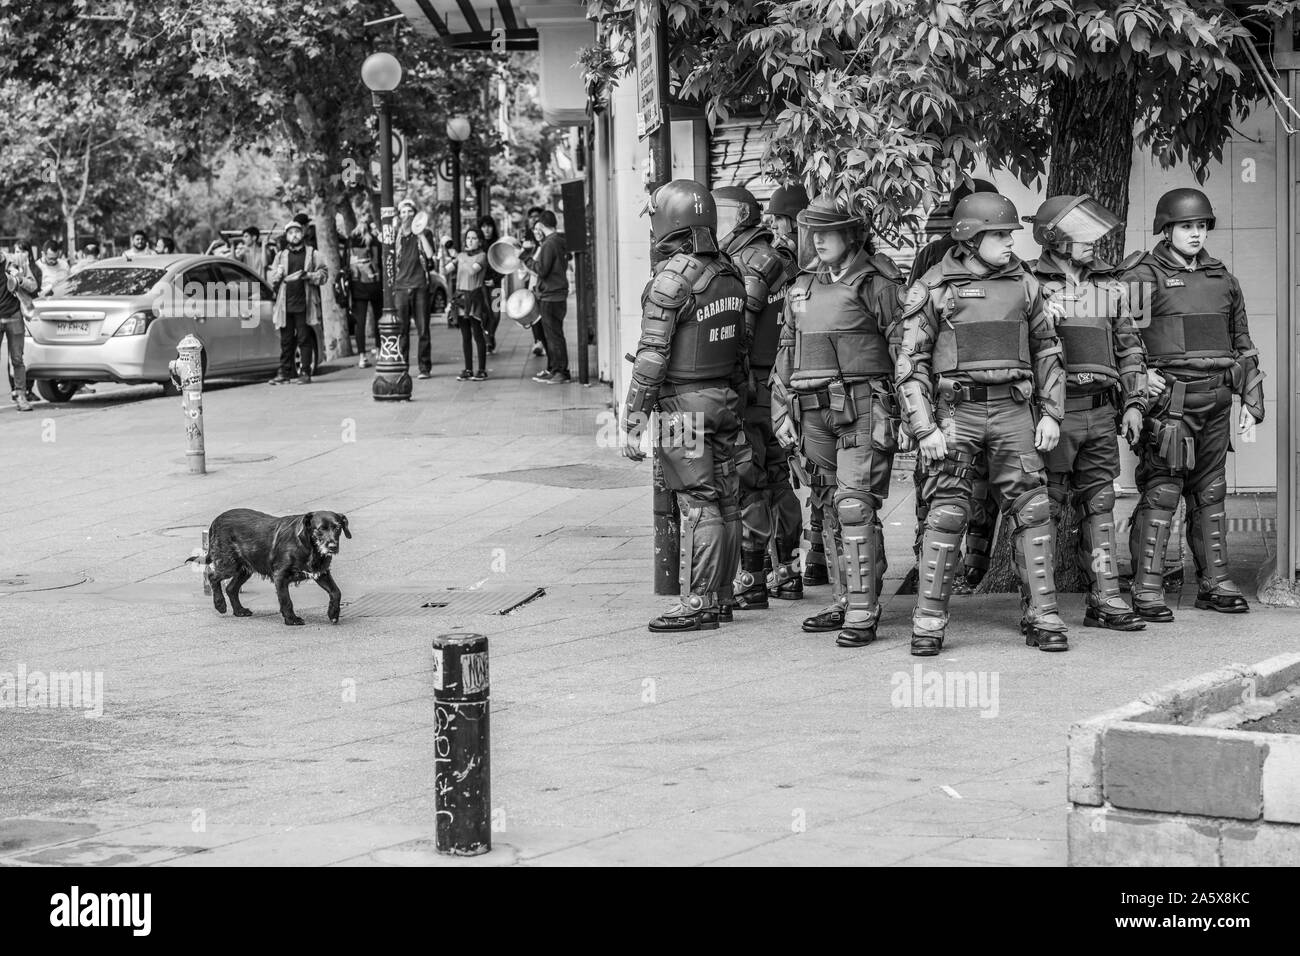 Indifferent dog passing through the clashes between the police and protesters at Santiago streets during the latest October 2019 riots Santiago, Chile Stock Photo